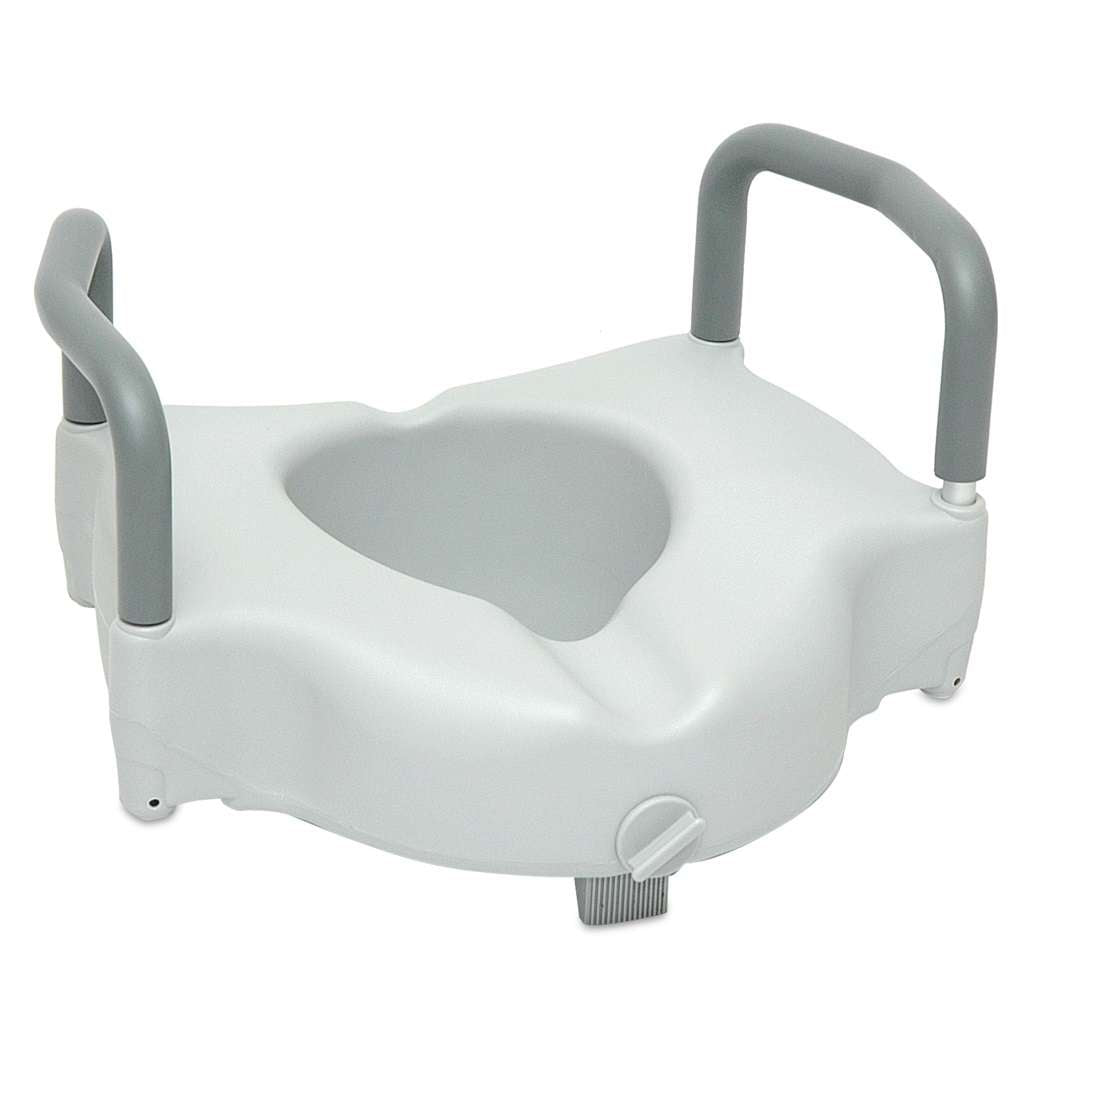 ProBasics Raised Toilet Seat with Lock and Arms ( 350 lb Weight Capacity)